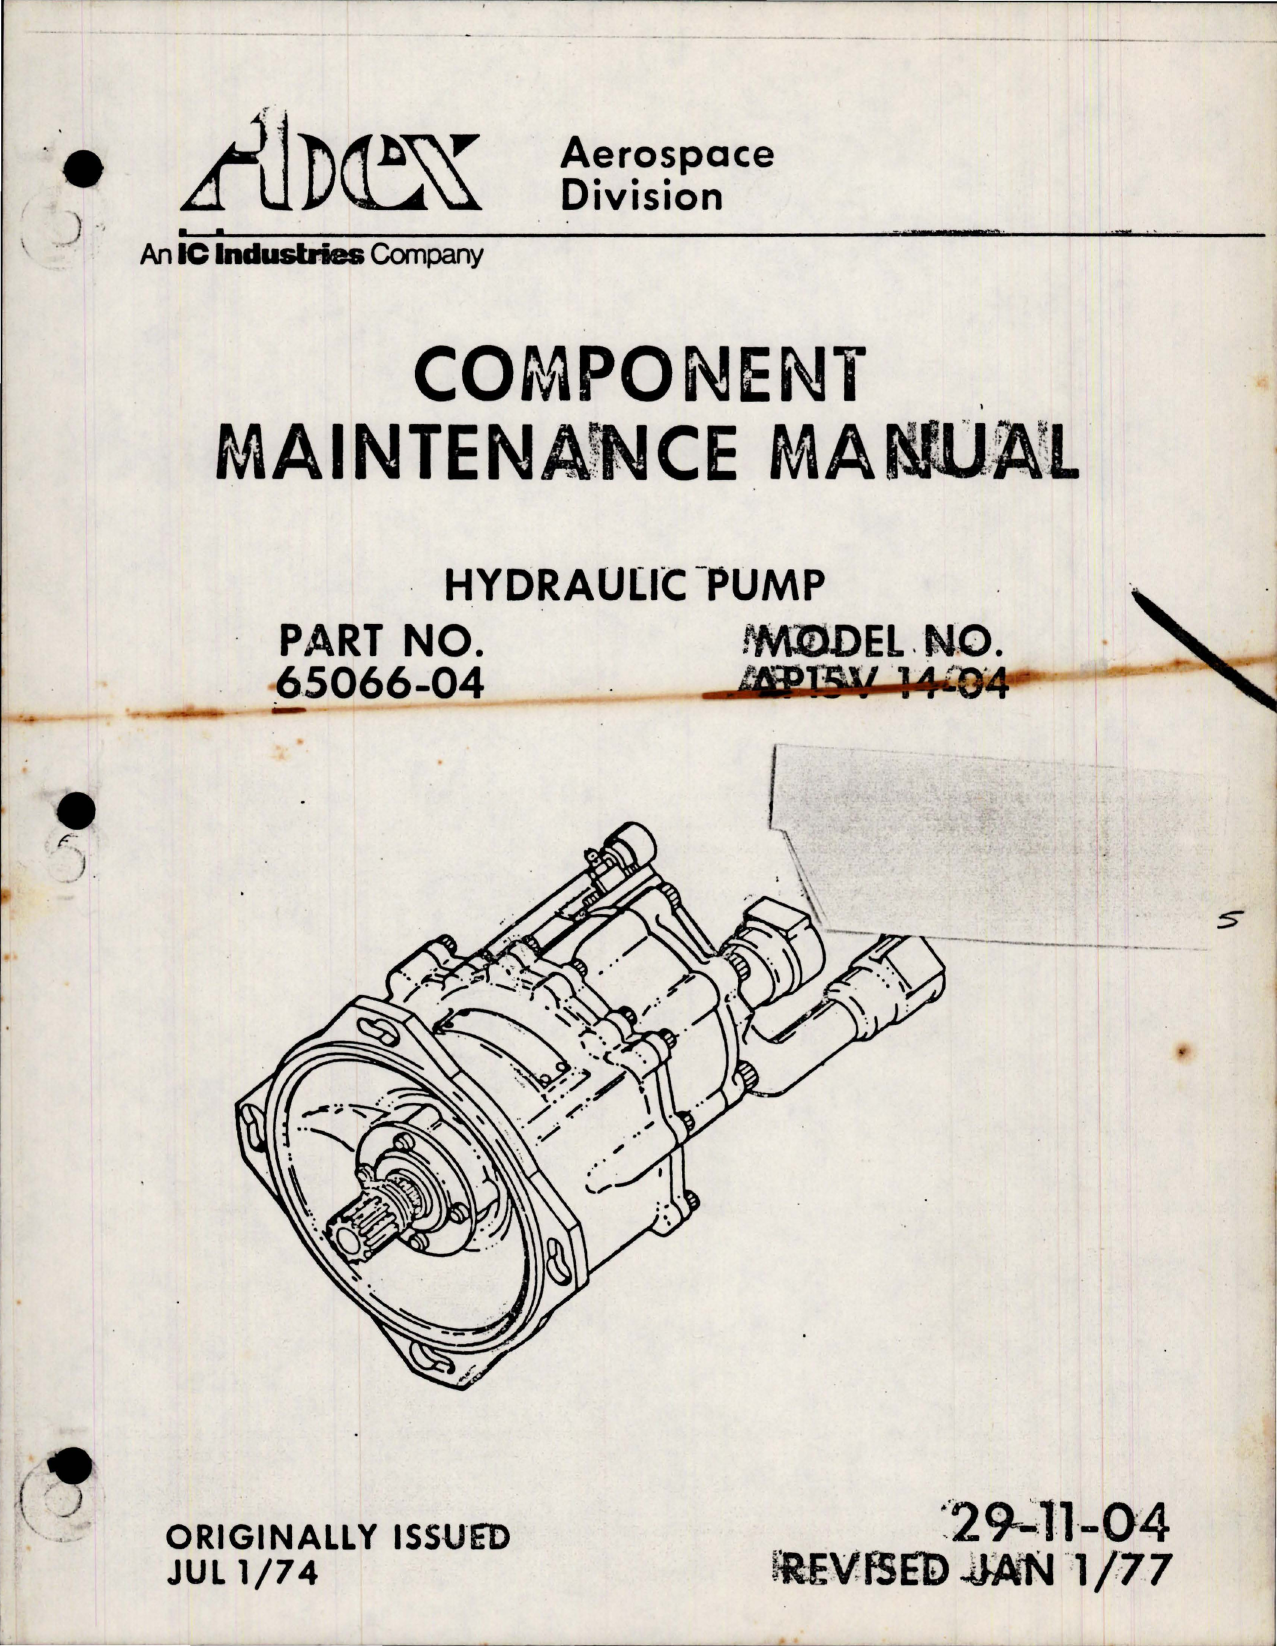 Sample page 1 from AirCorps Library document: Maintenance Manual for Hydraulic Pump - Part 65066-04 - Model AP15V-14-04 